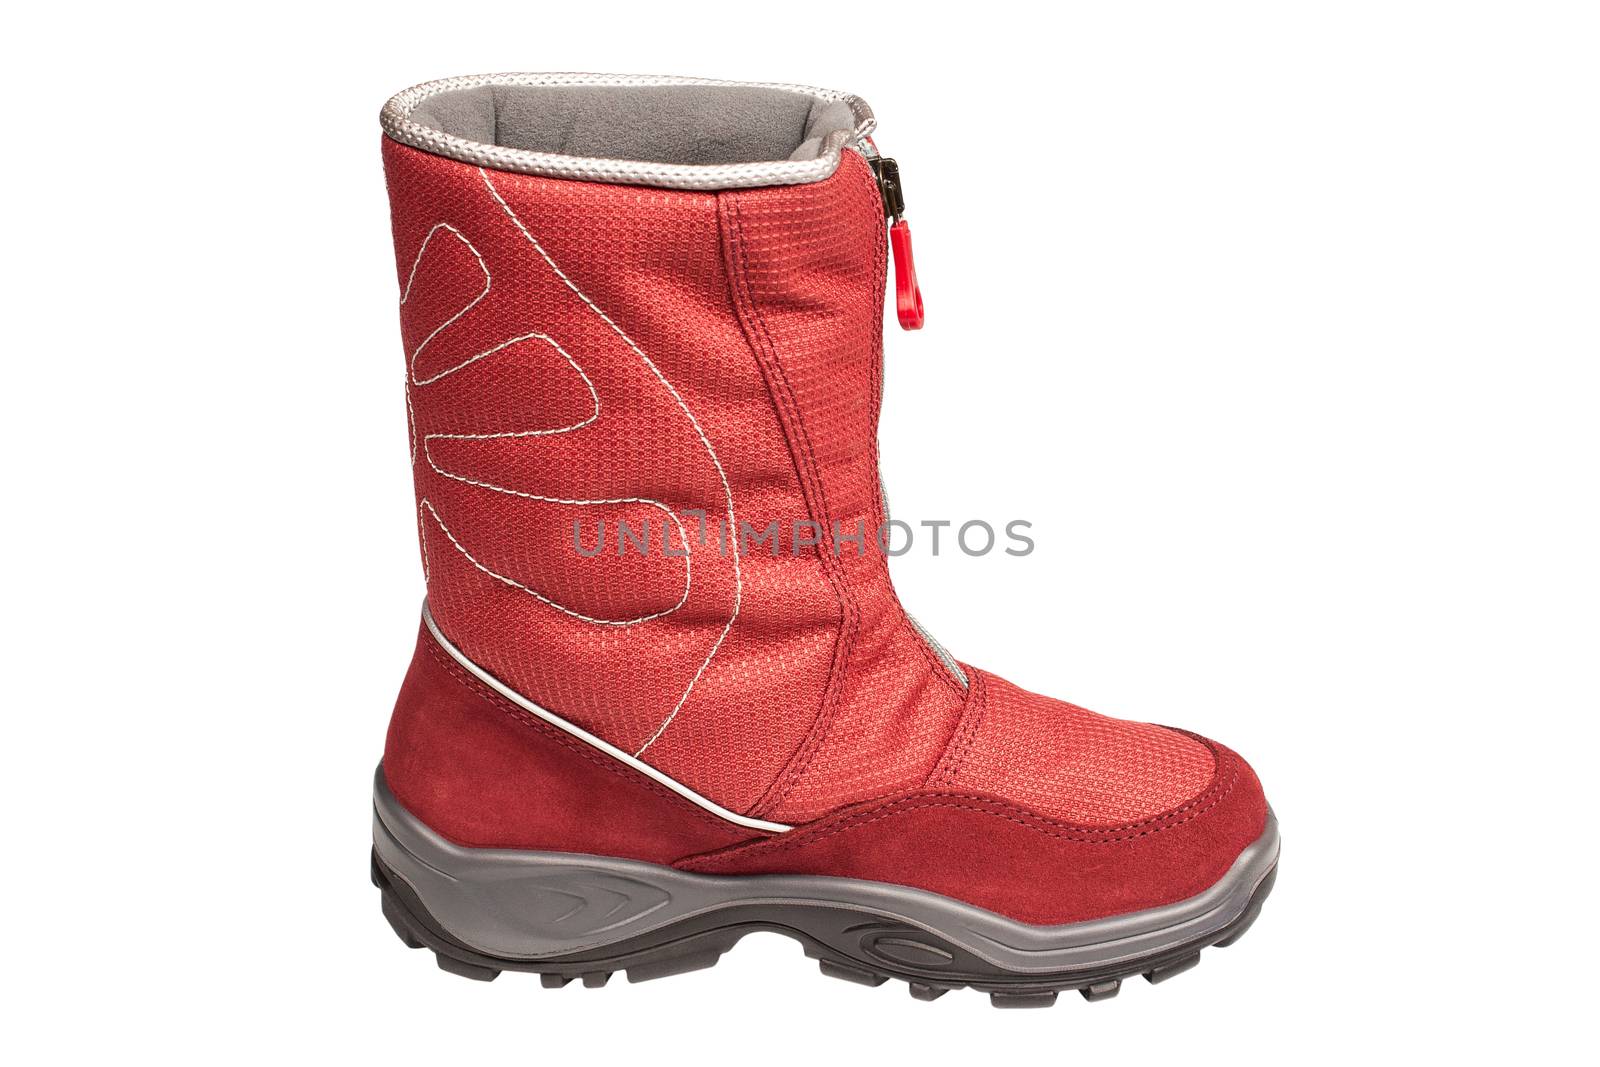 children's red waterproof boot on a white background by abelikov